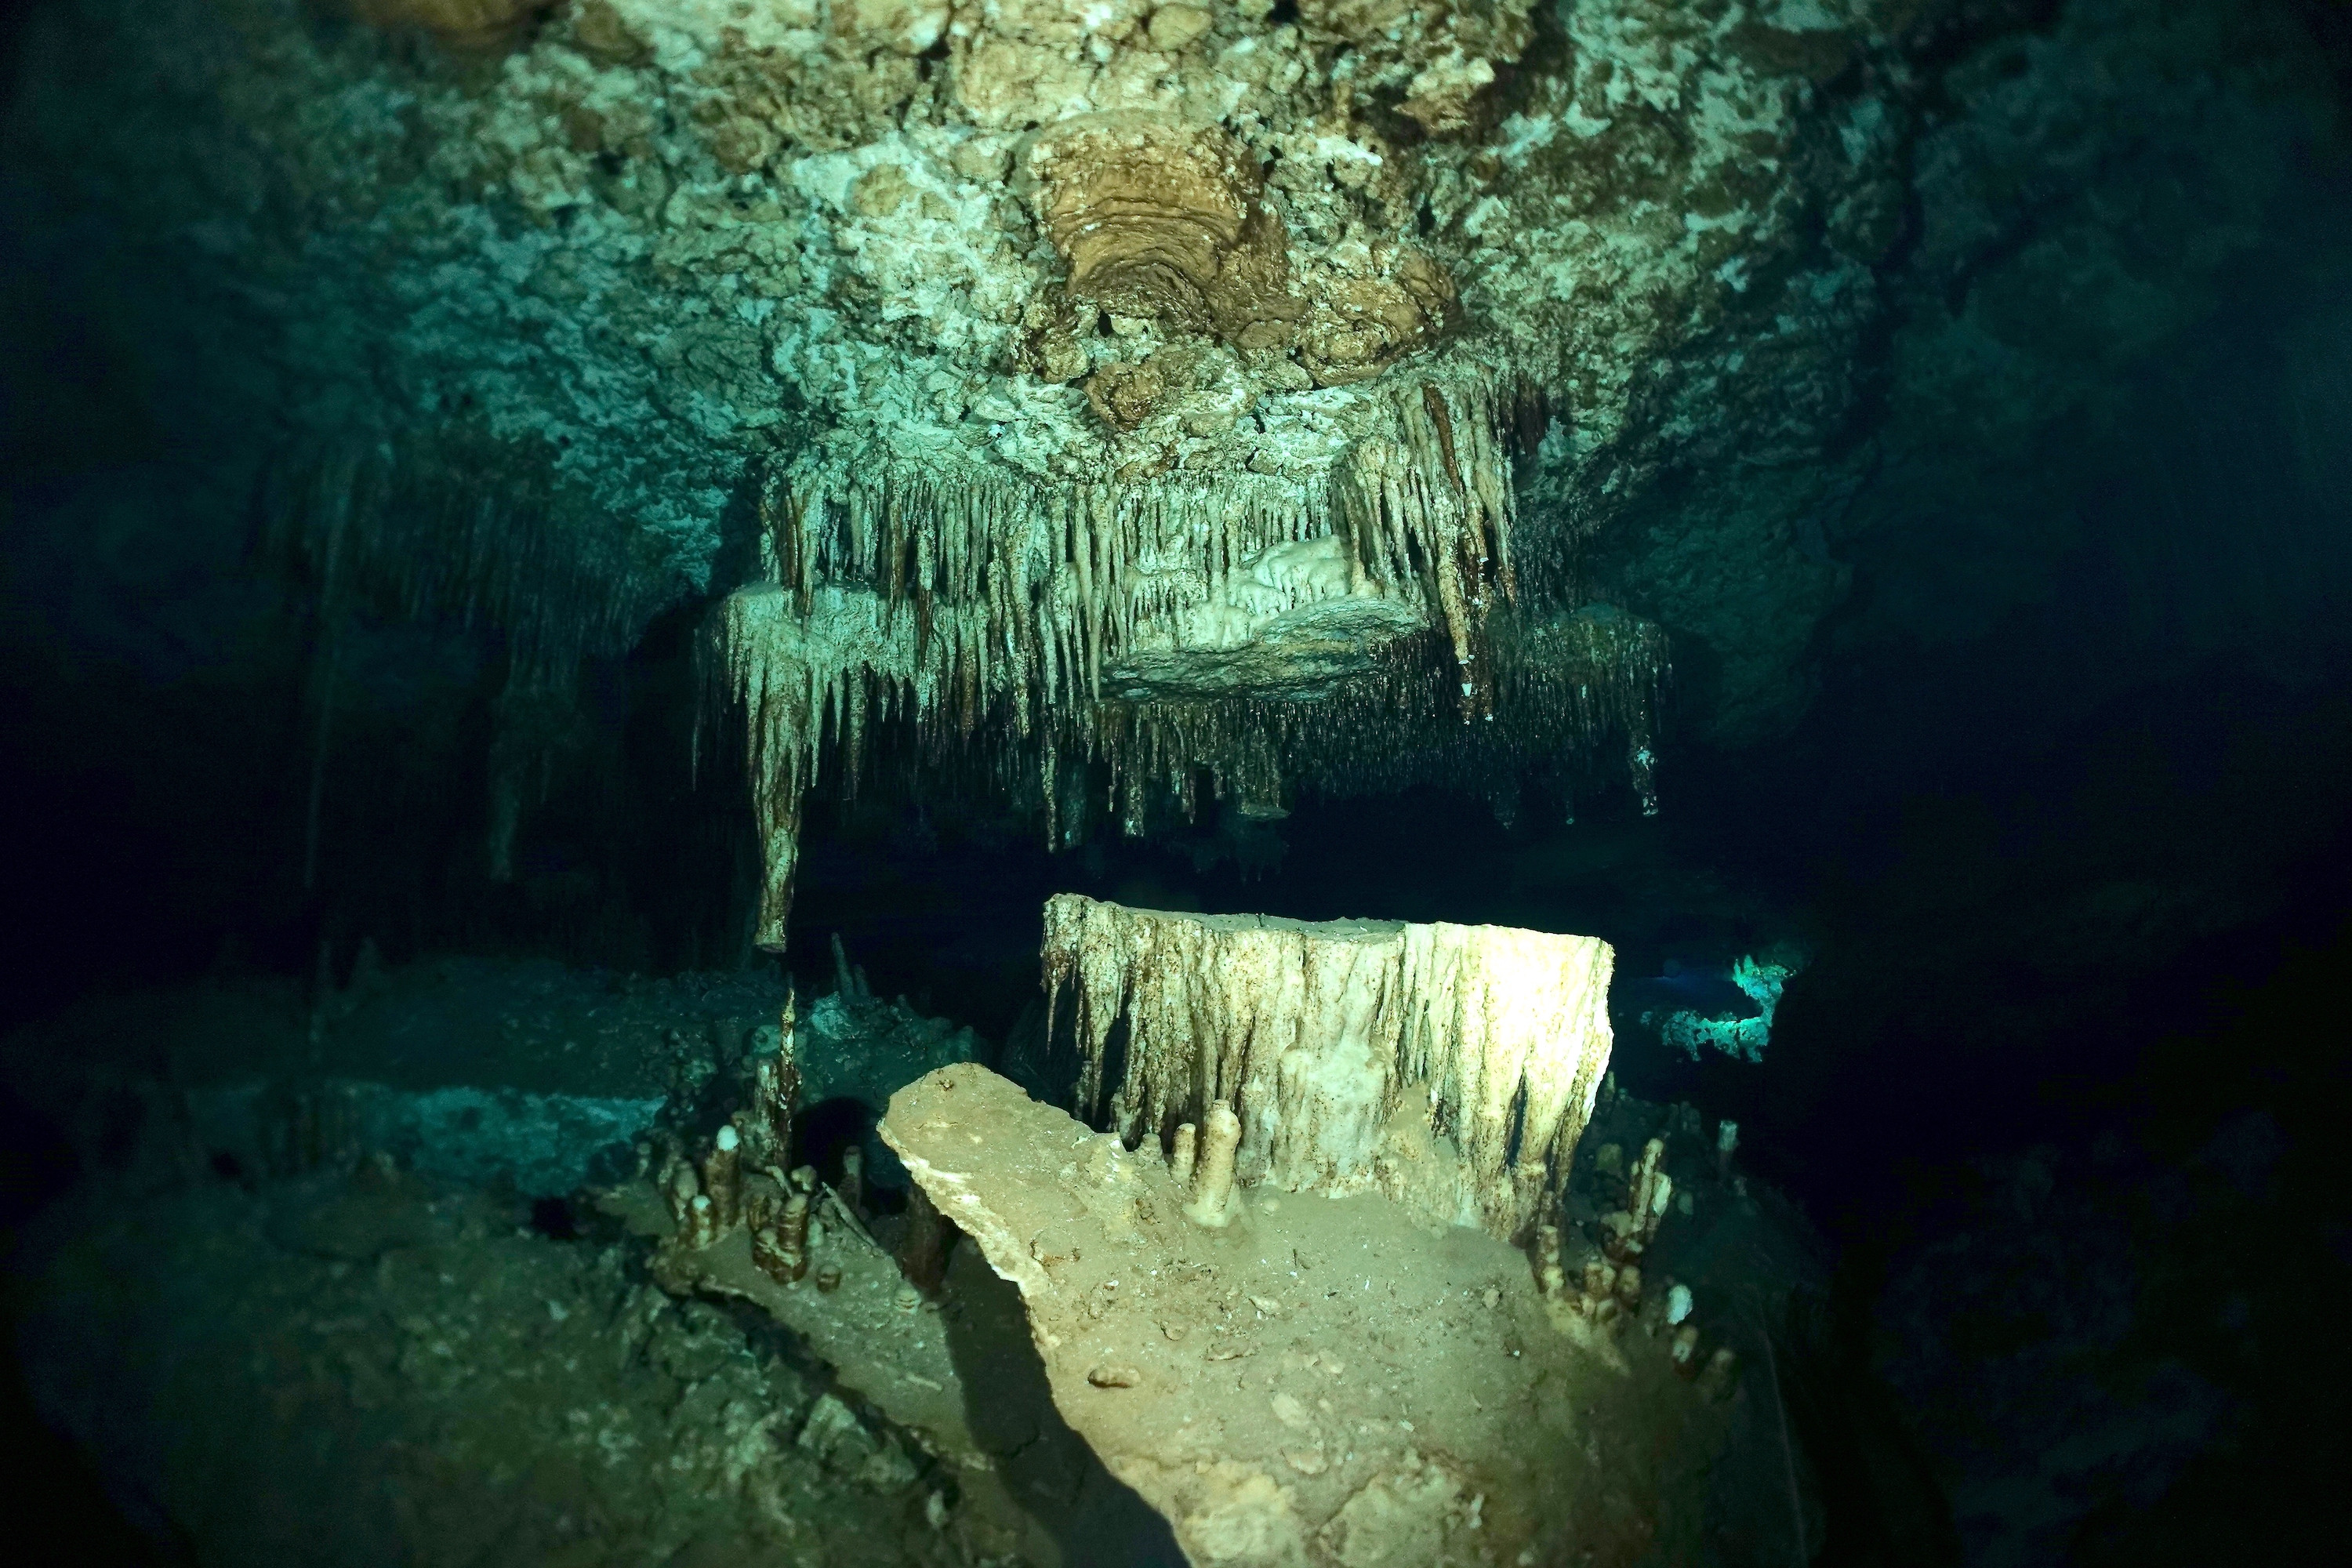 Collapse of a cluster of stalactites in Cenote Minotauro. Photo by Pierre Constant